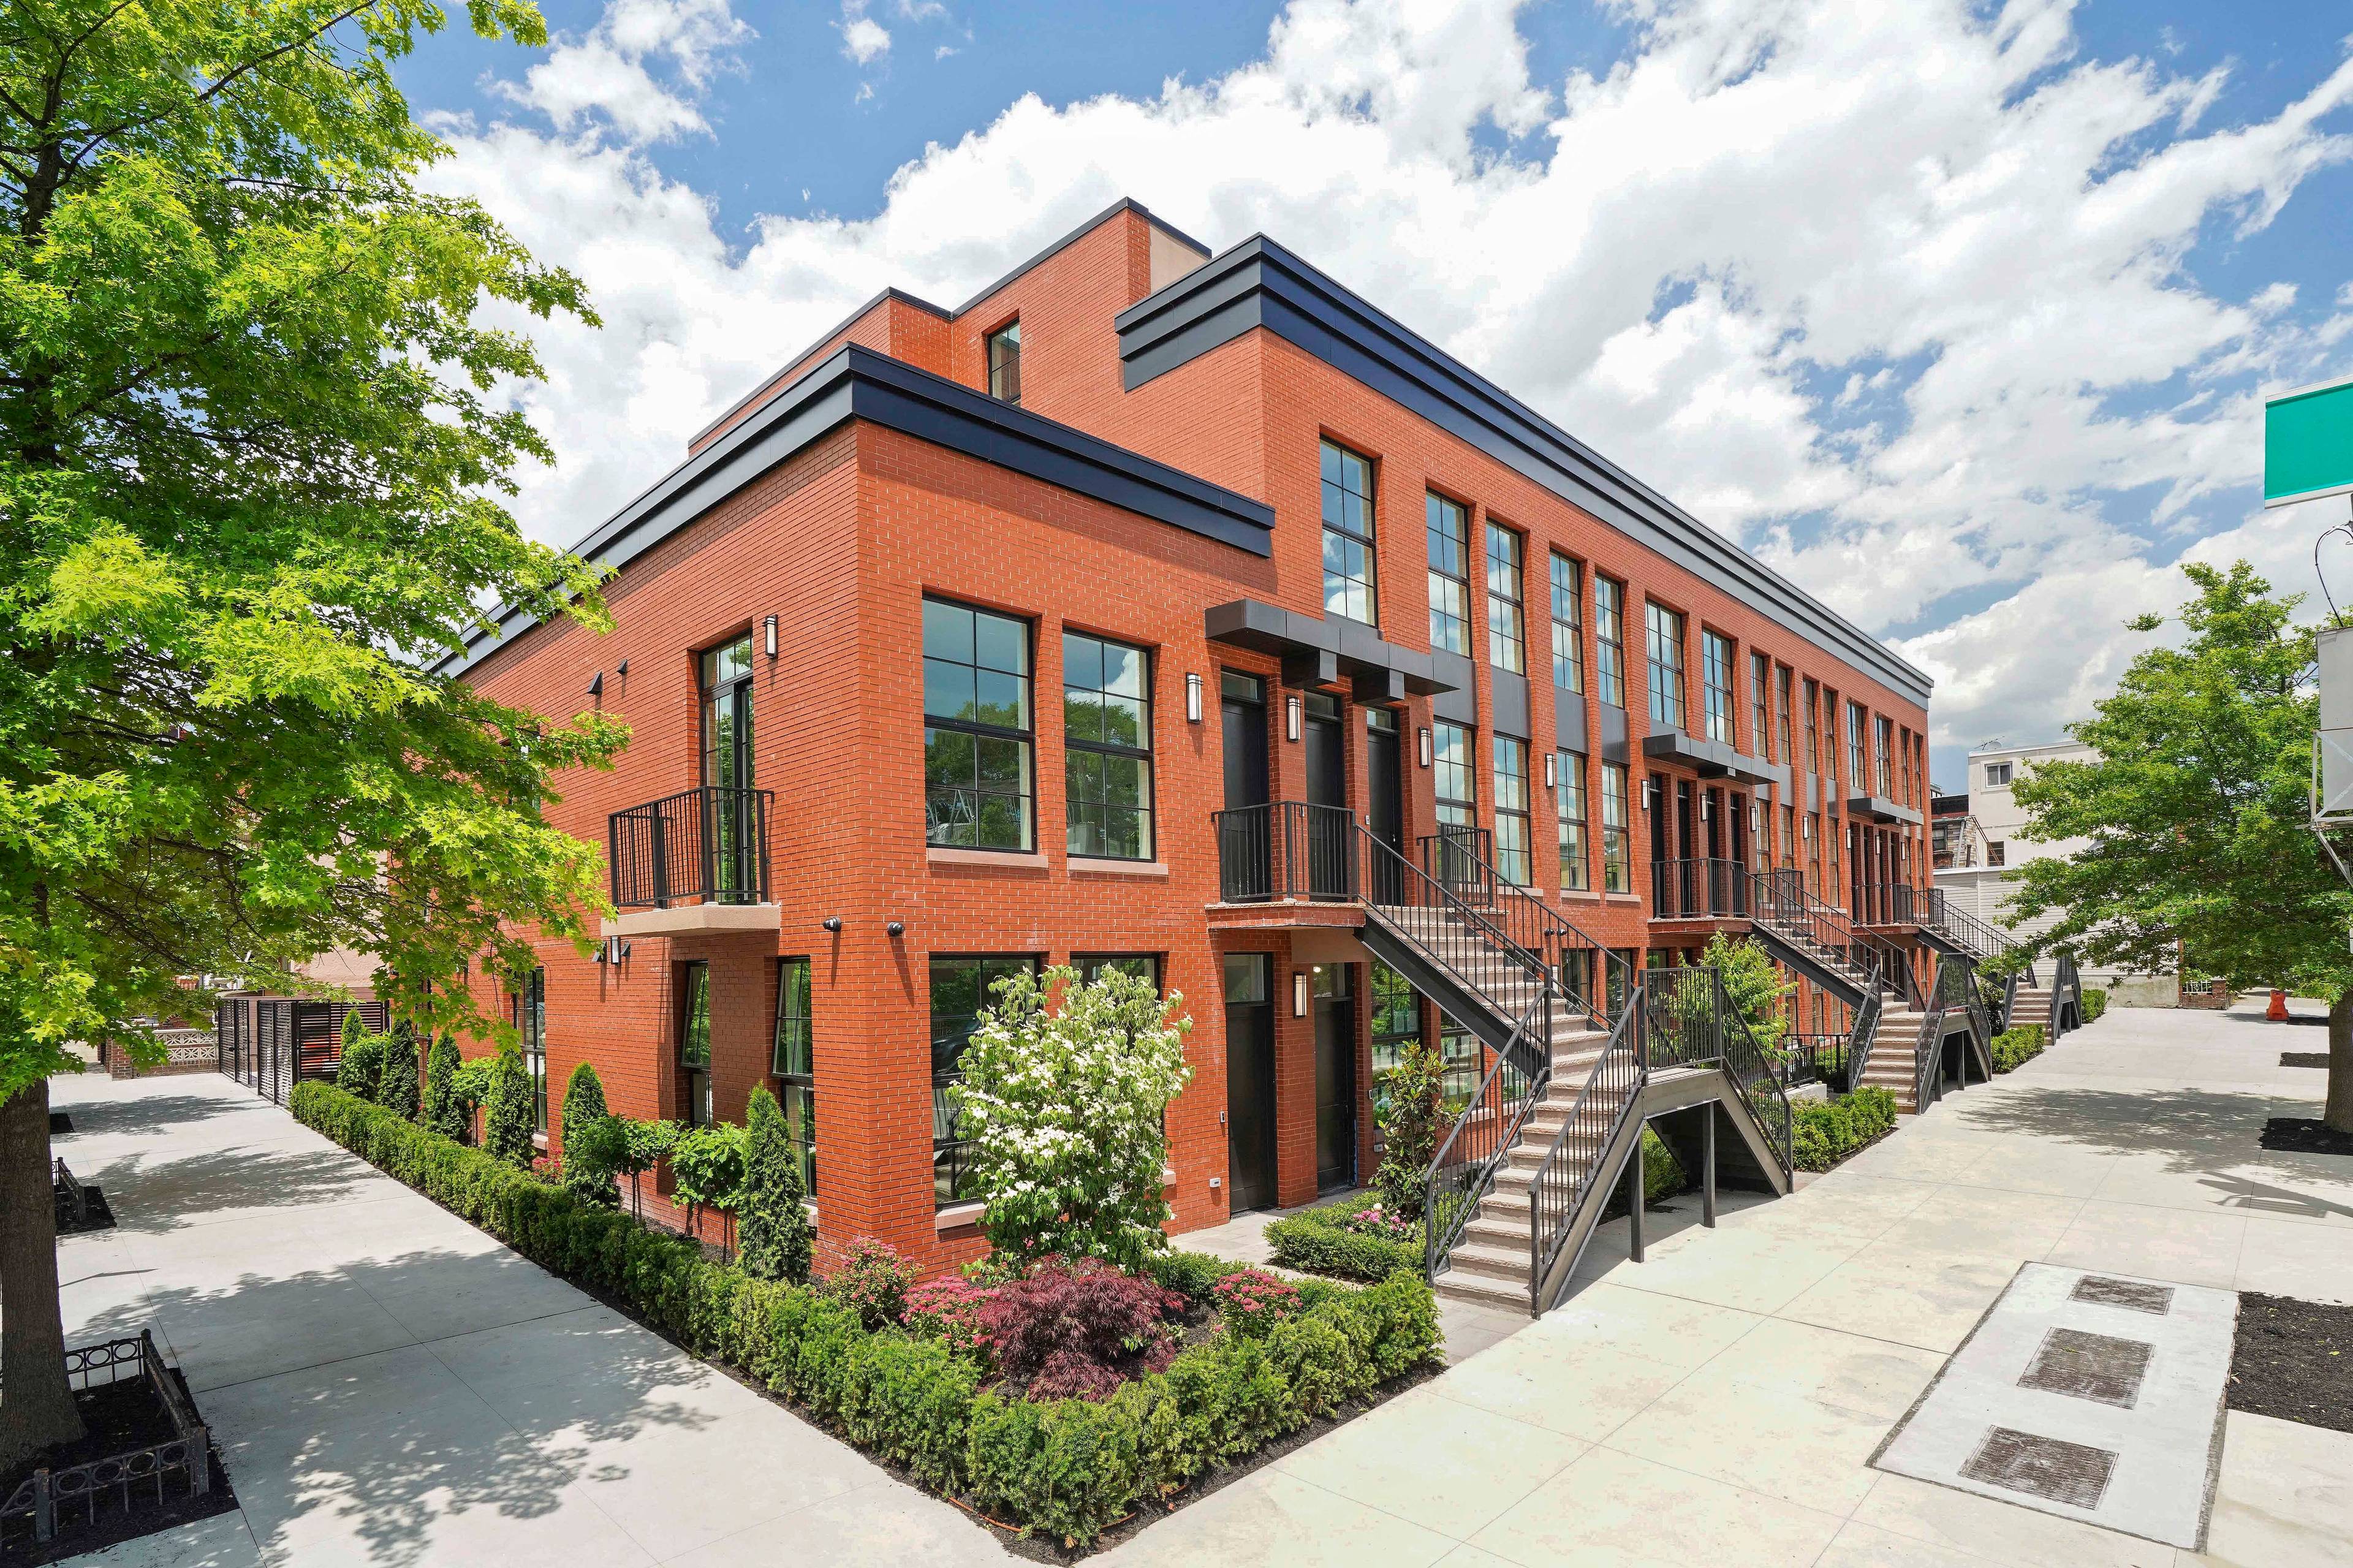 Introducing The Parisa, a distinguished new development condominium nestled in the heart of Windsor Terrace, Brooklyn.